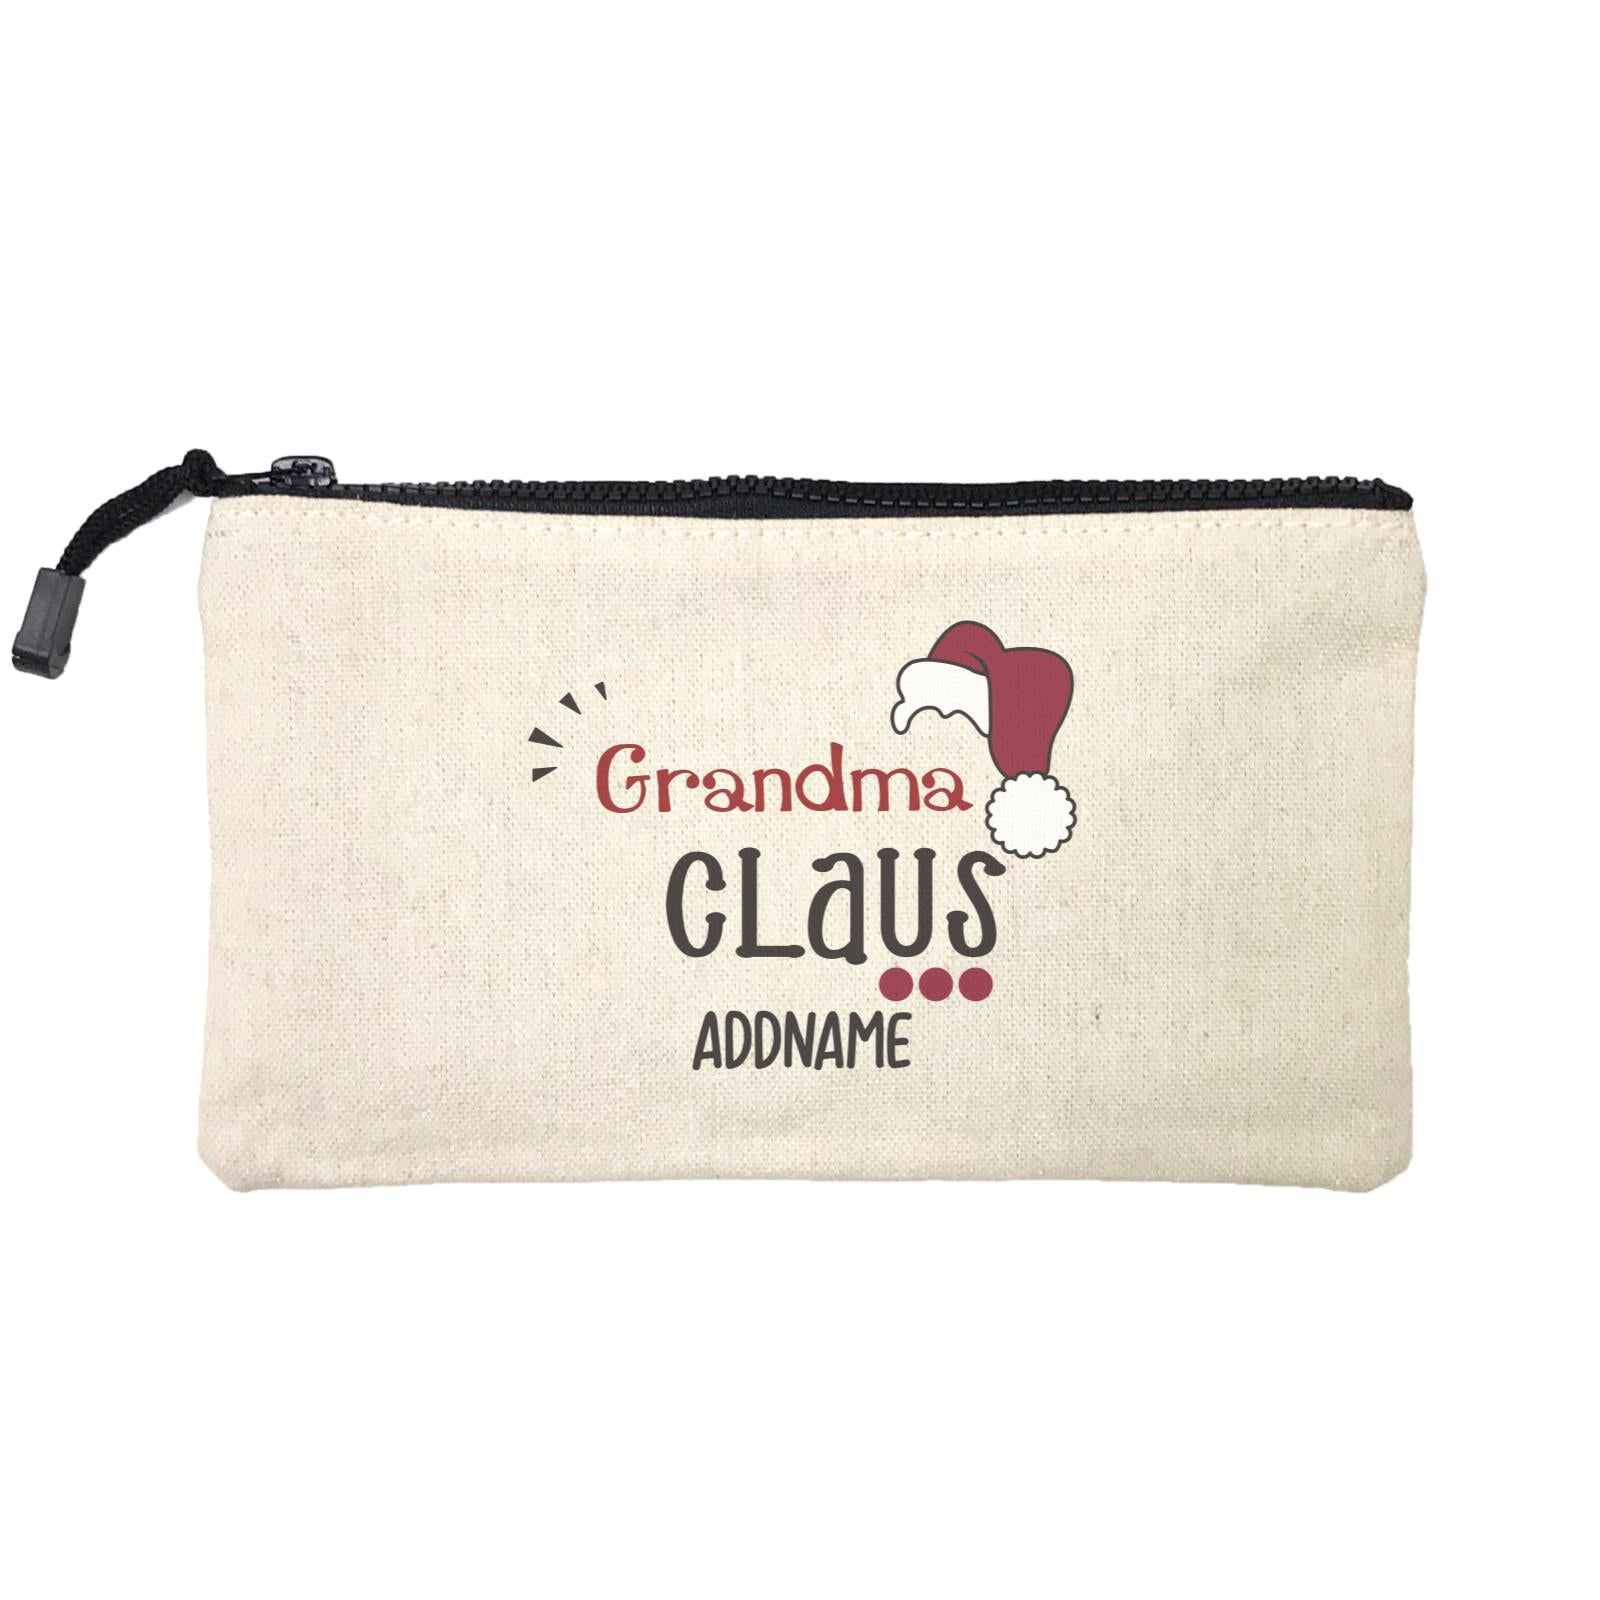 Xmas Grandma Claus with Santa Hat Mini Accessories Stationery Pouch